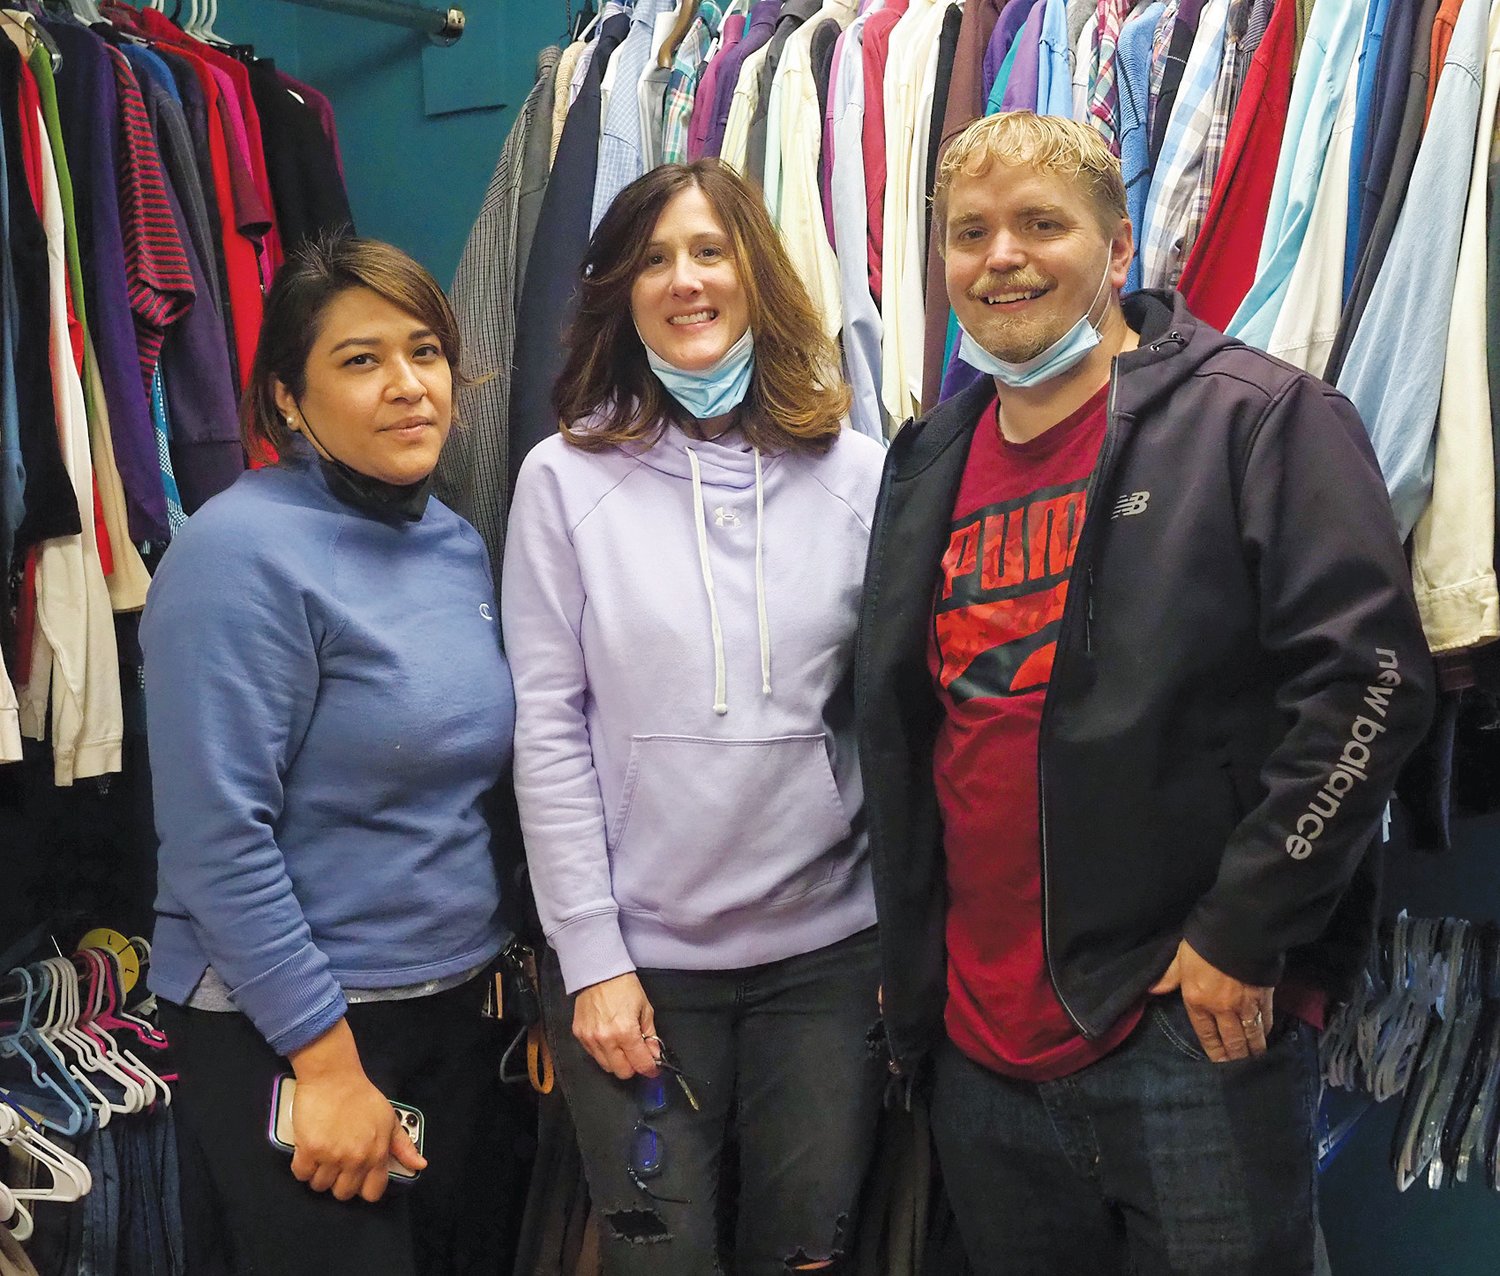 Volunteers Norma Hernandez (left), clothing closet manager Angie Stanley (middle) and Peter Yoho help distribute free clothes to those in need at Freedom Family Church on Feb. 19.